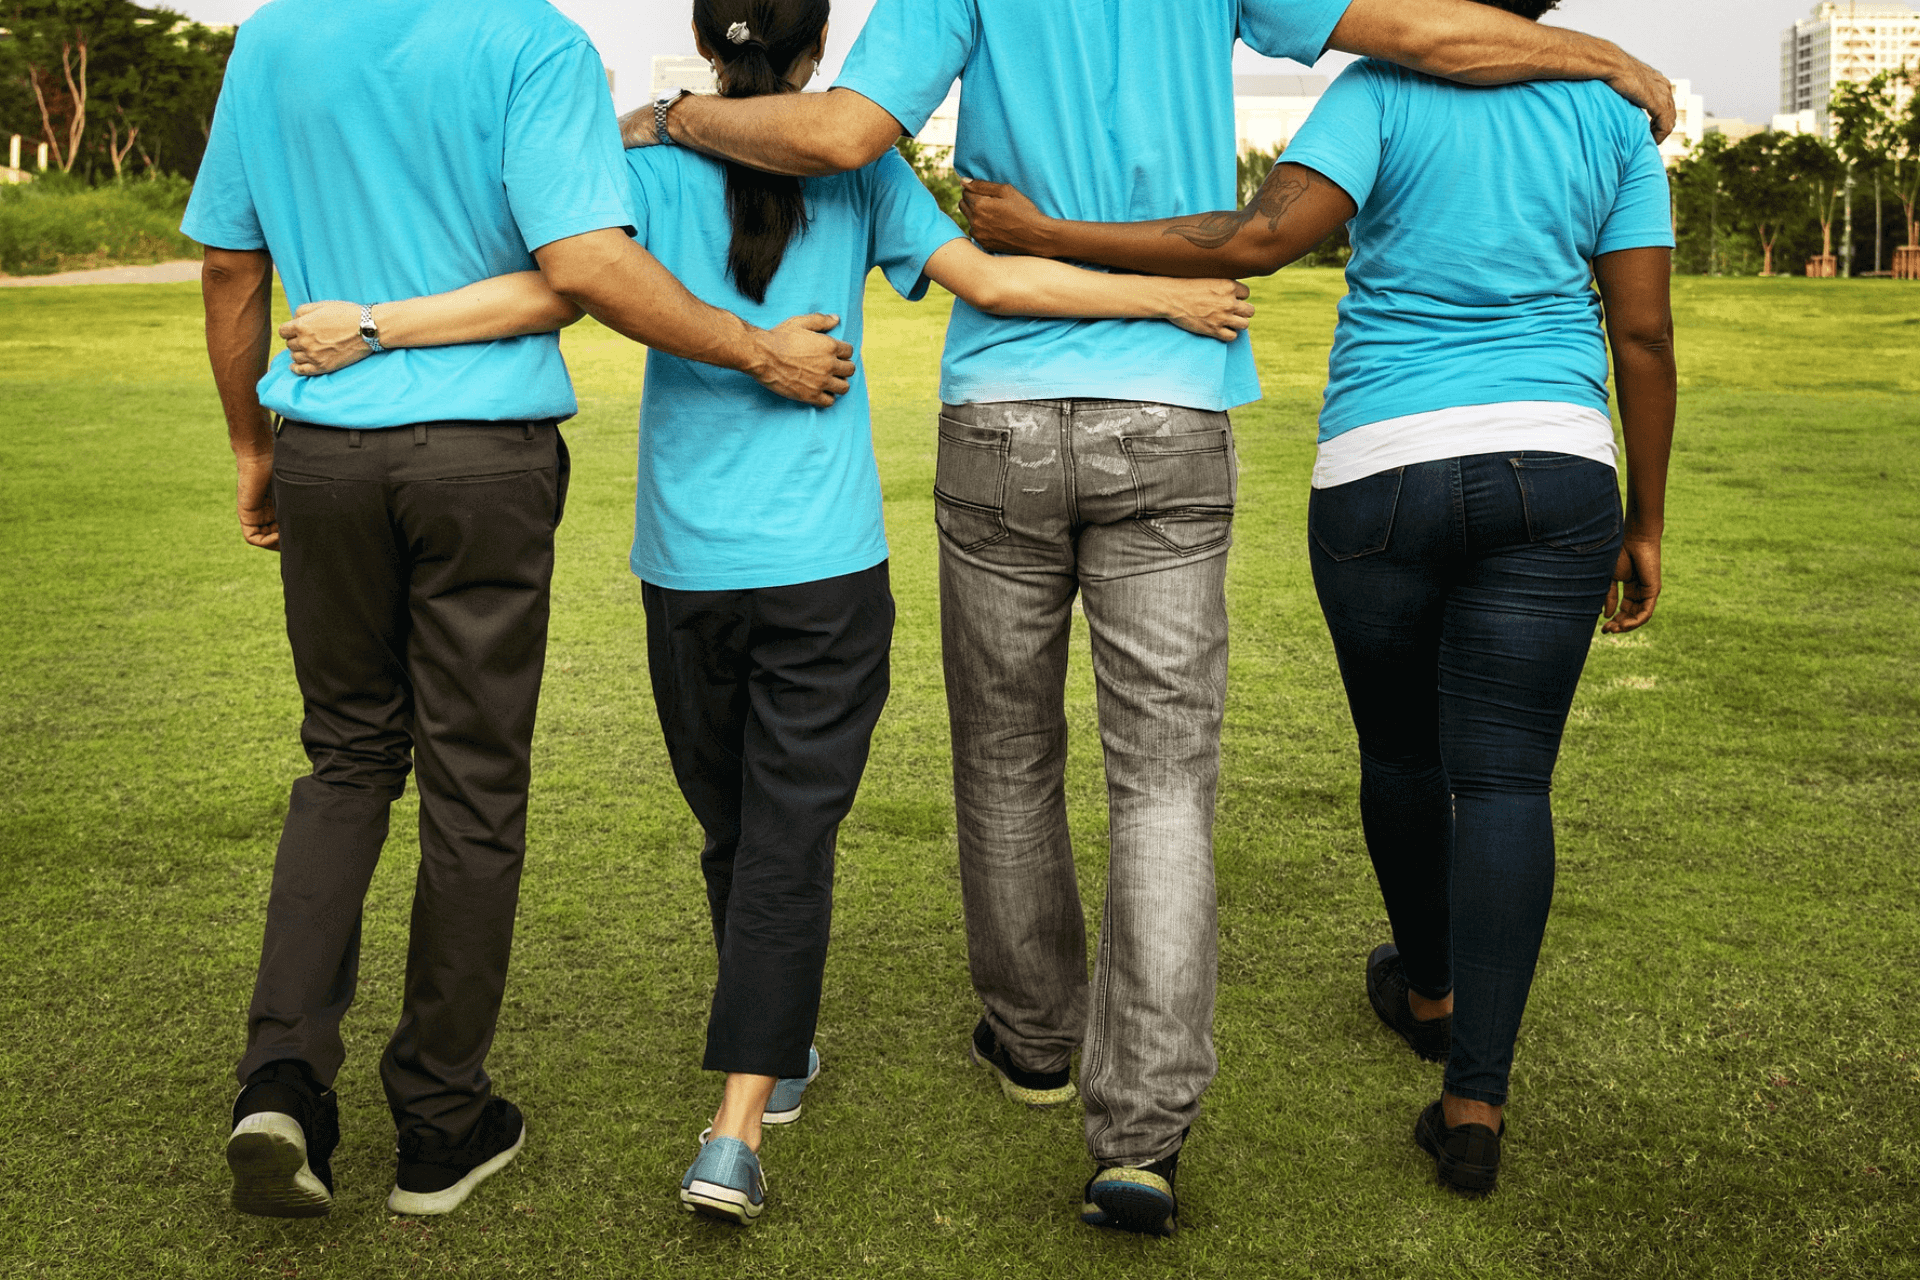 This image depicts the backs of four members of a small nonprofit  with their arms around. Representing the unity of small nonprofits